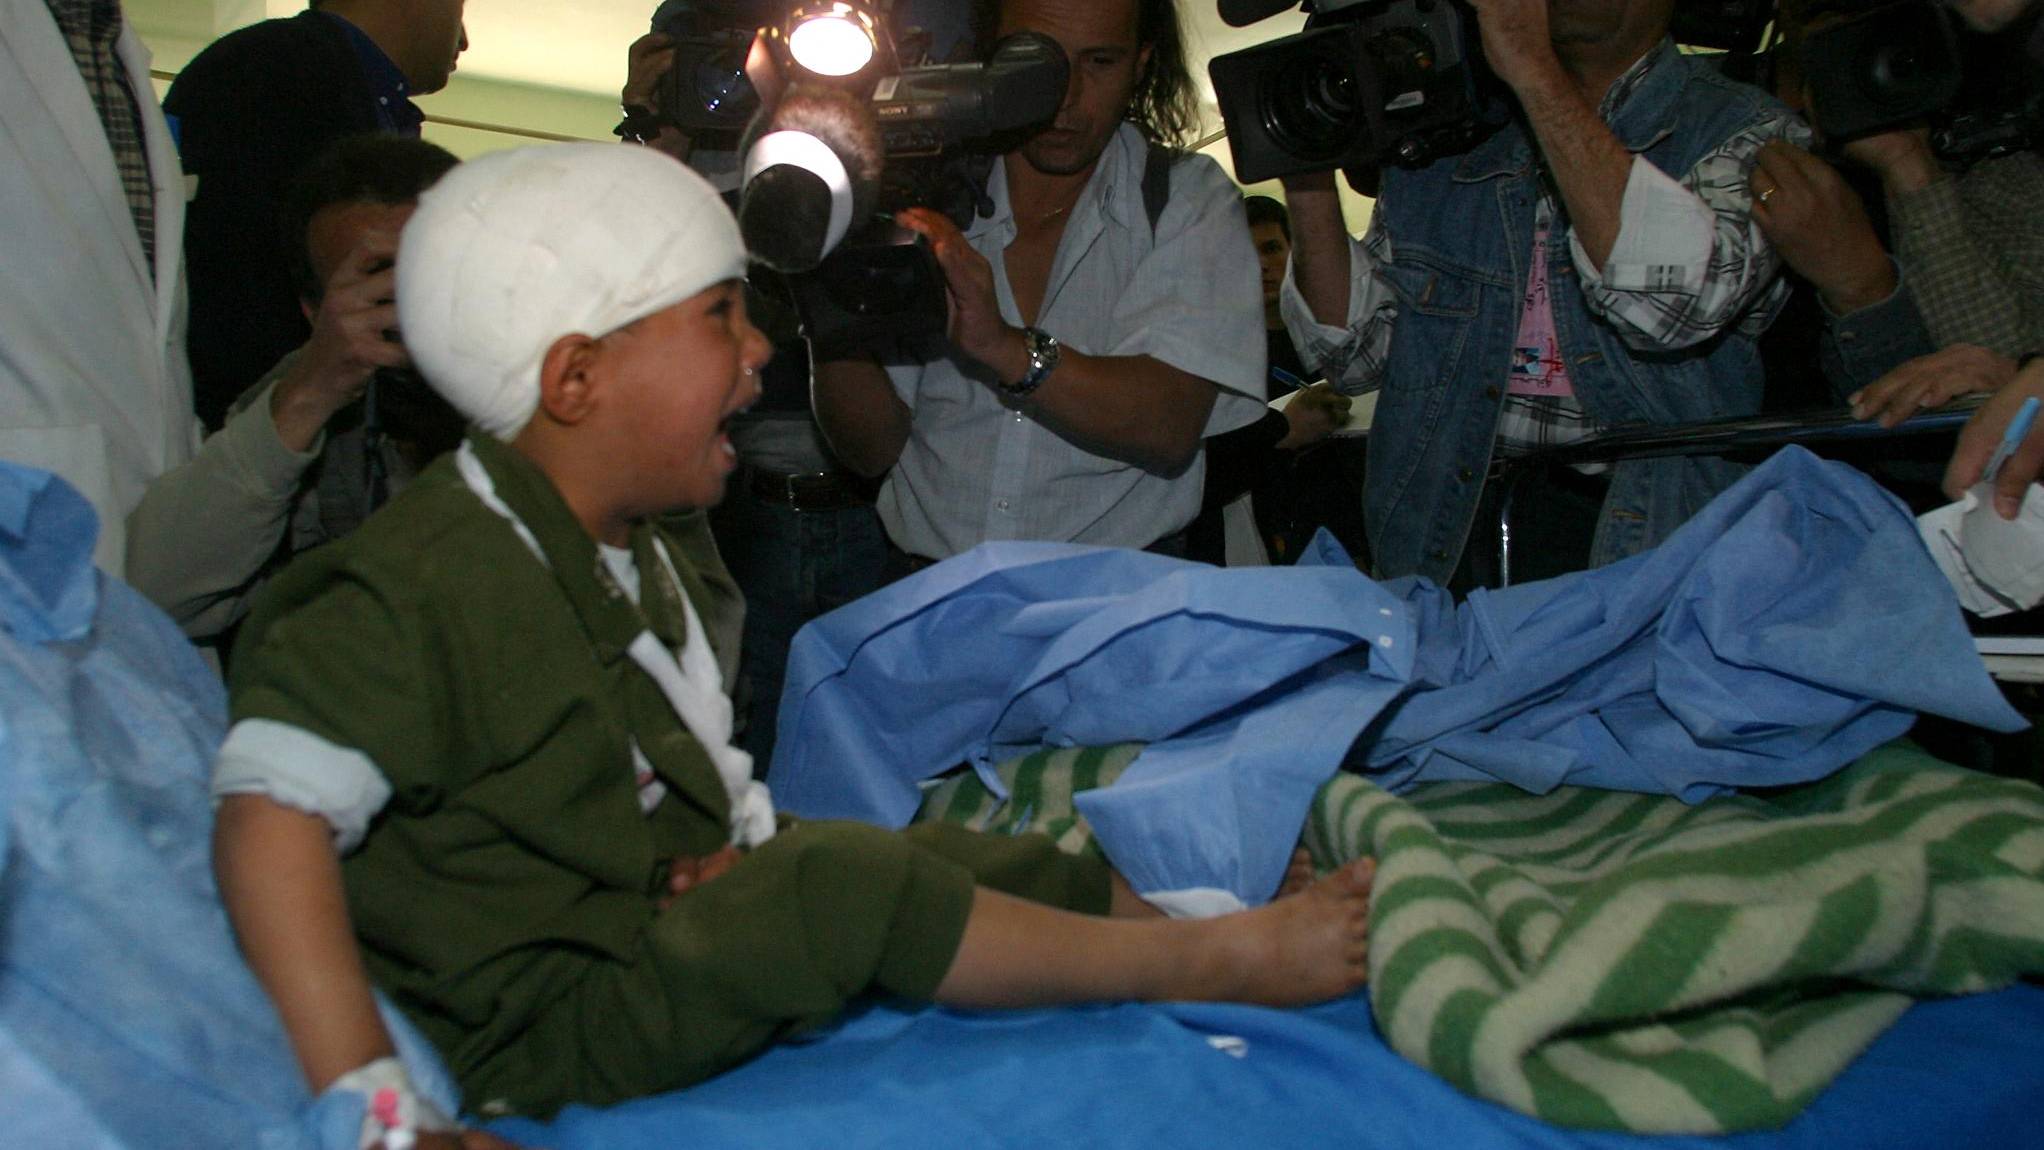 A wounded Iraqi child cries as he is shocked by photographers and cameramen during a tour at al-Yarmouk hospital by the ministry of information in Baghdad 22 March 2003.